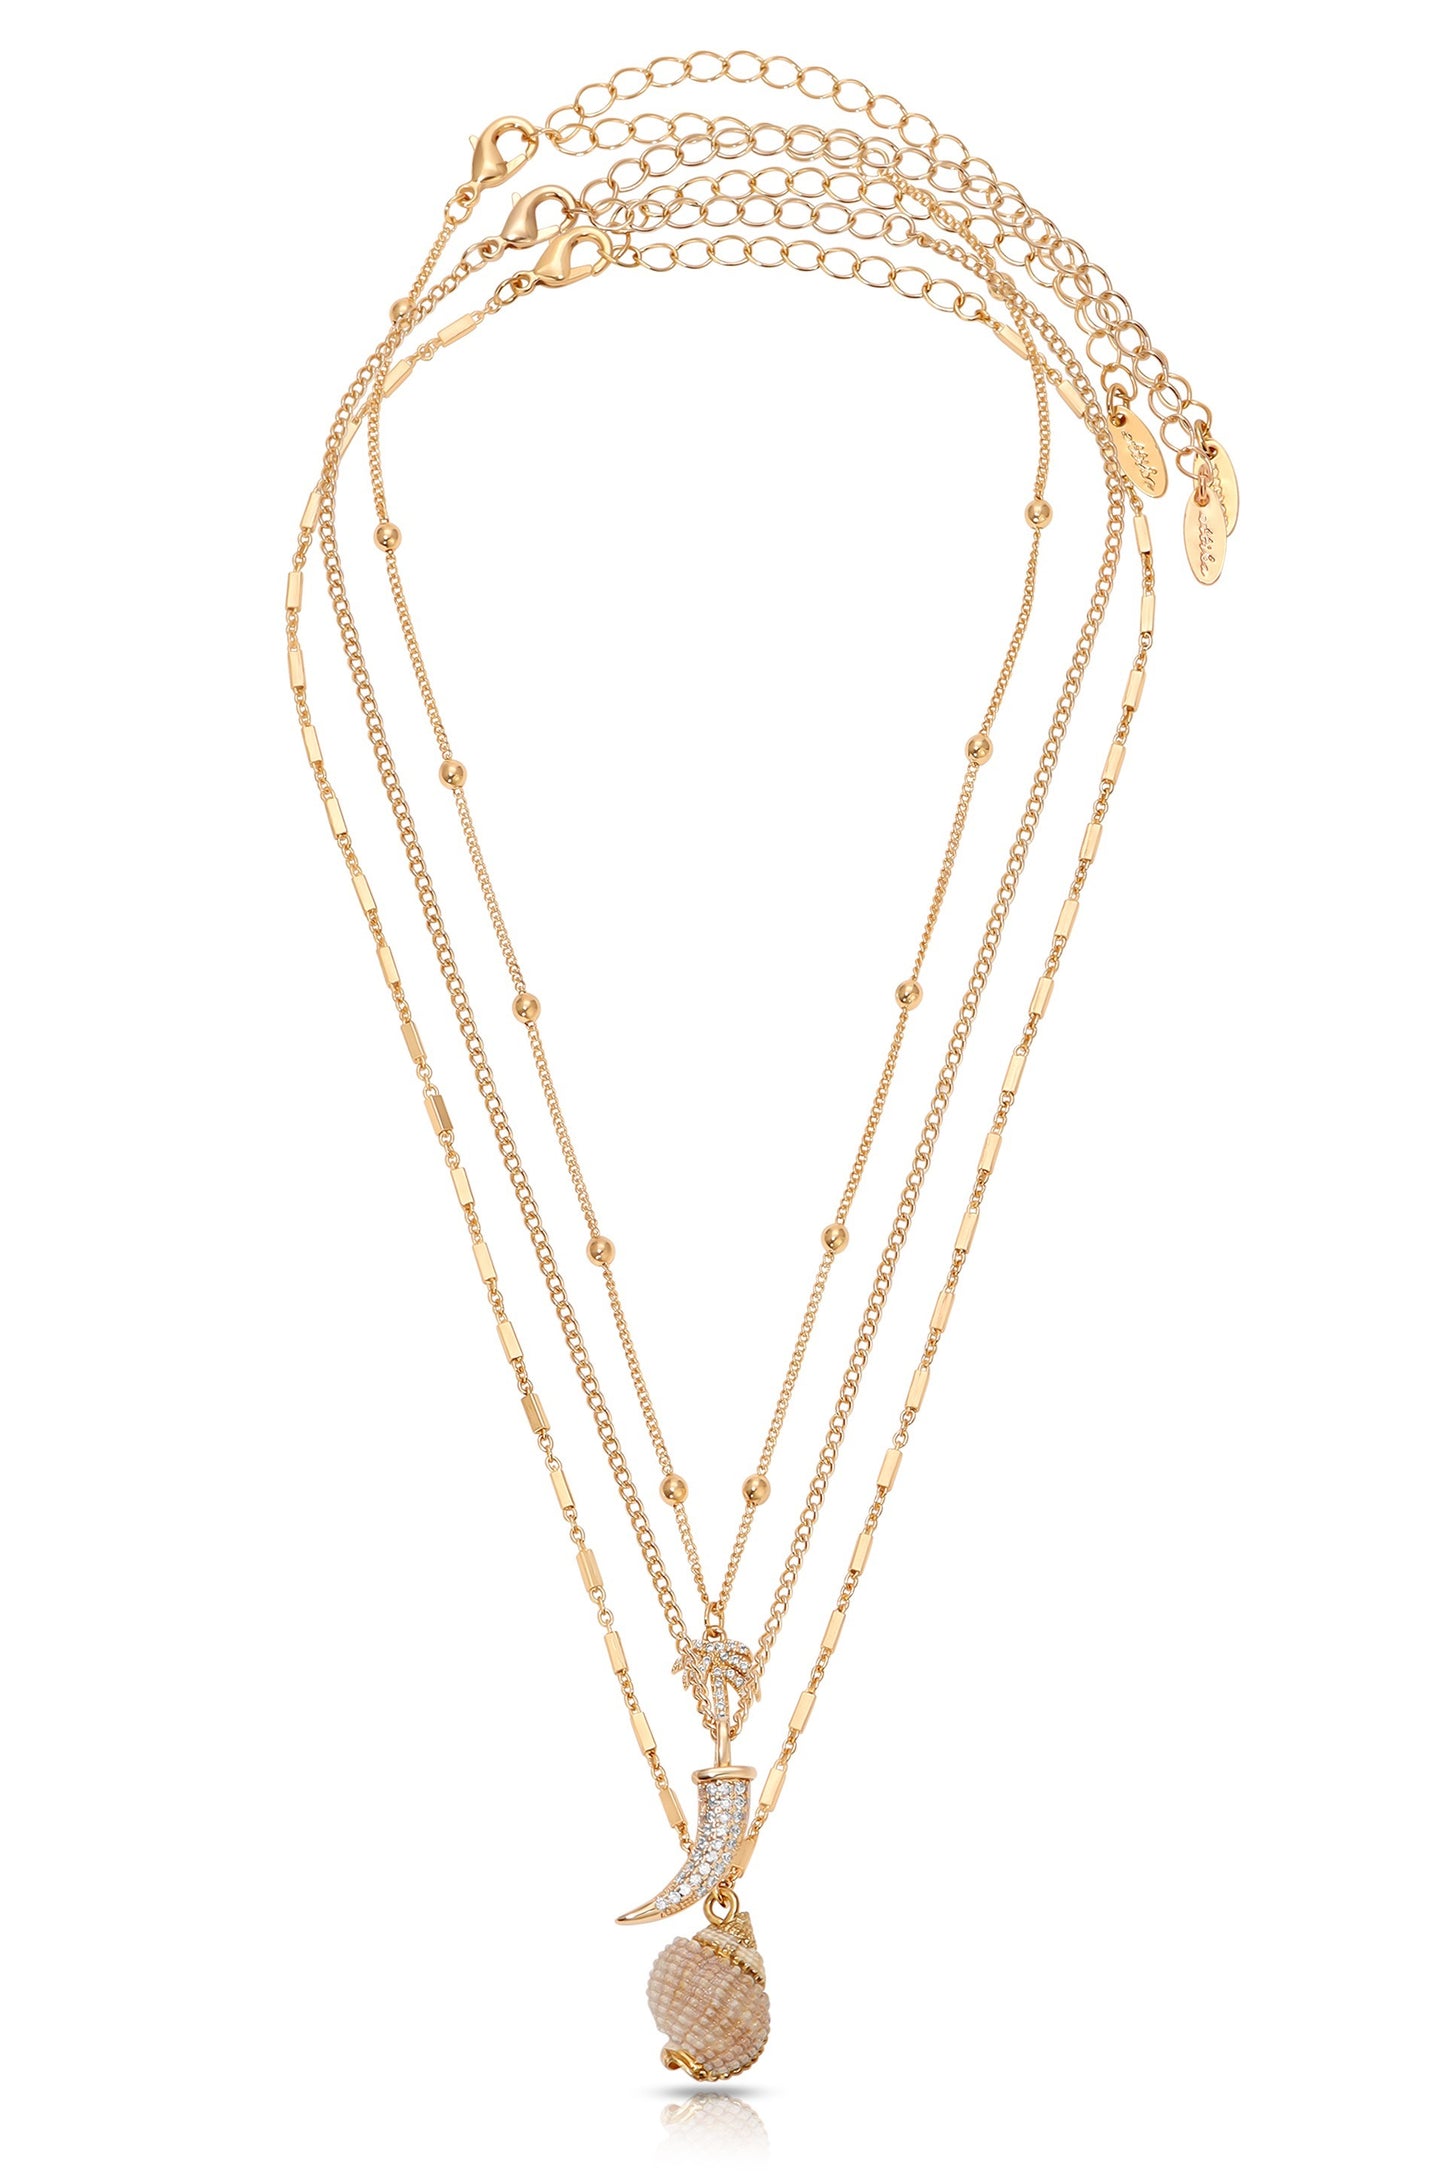 In the Tropics 18k Gold Plated Necklace Set